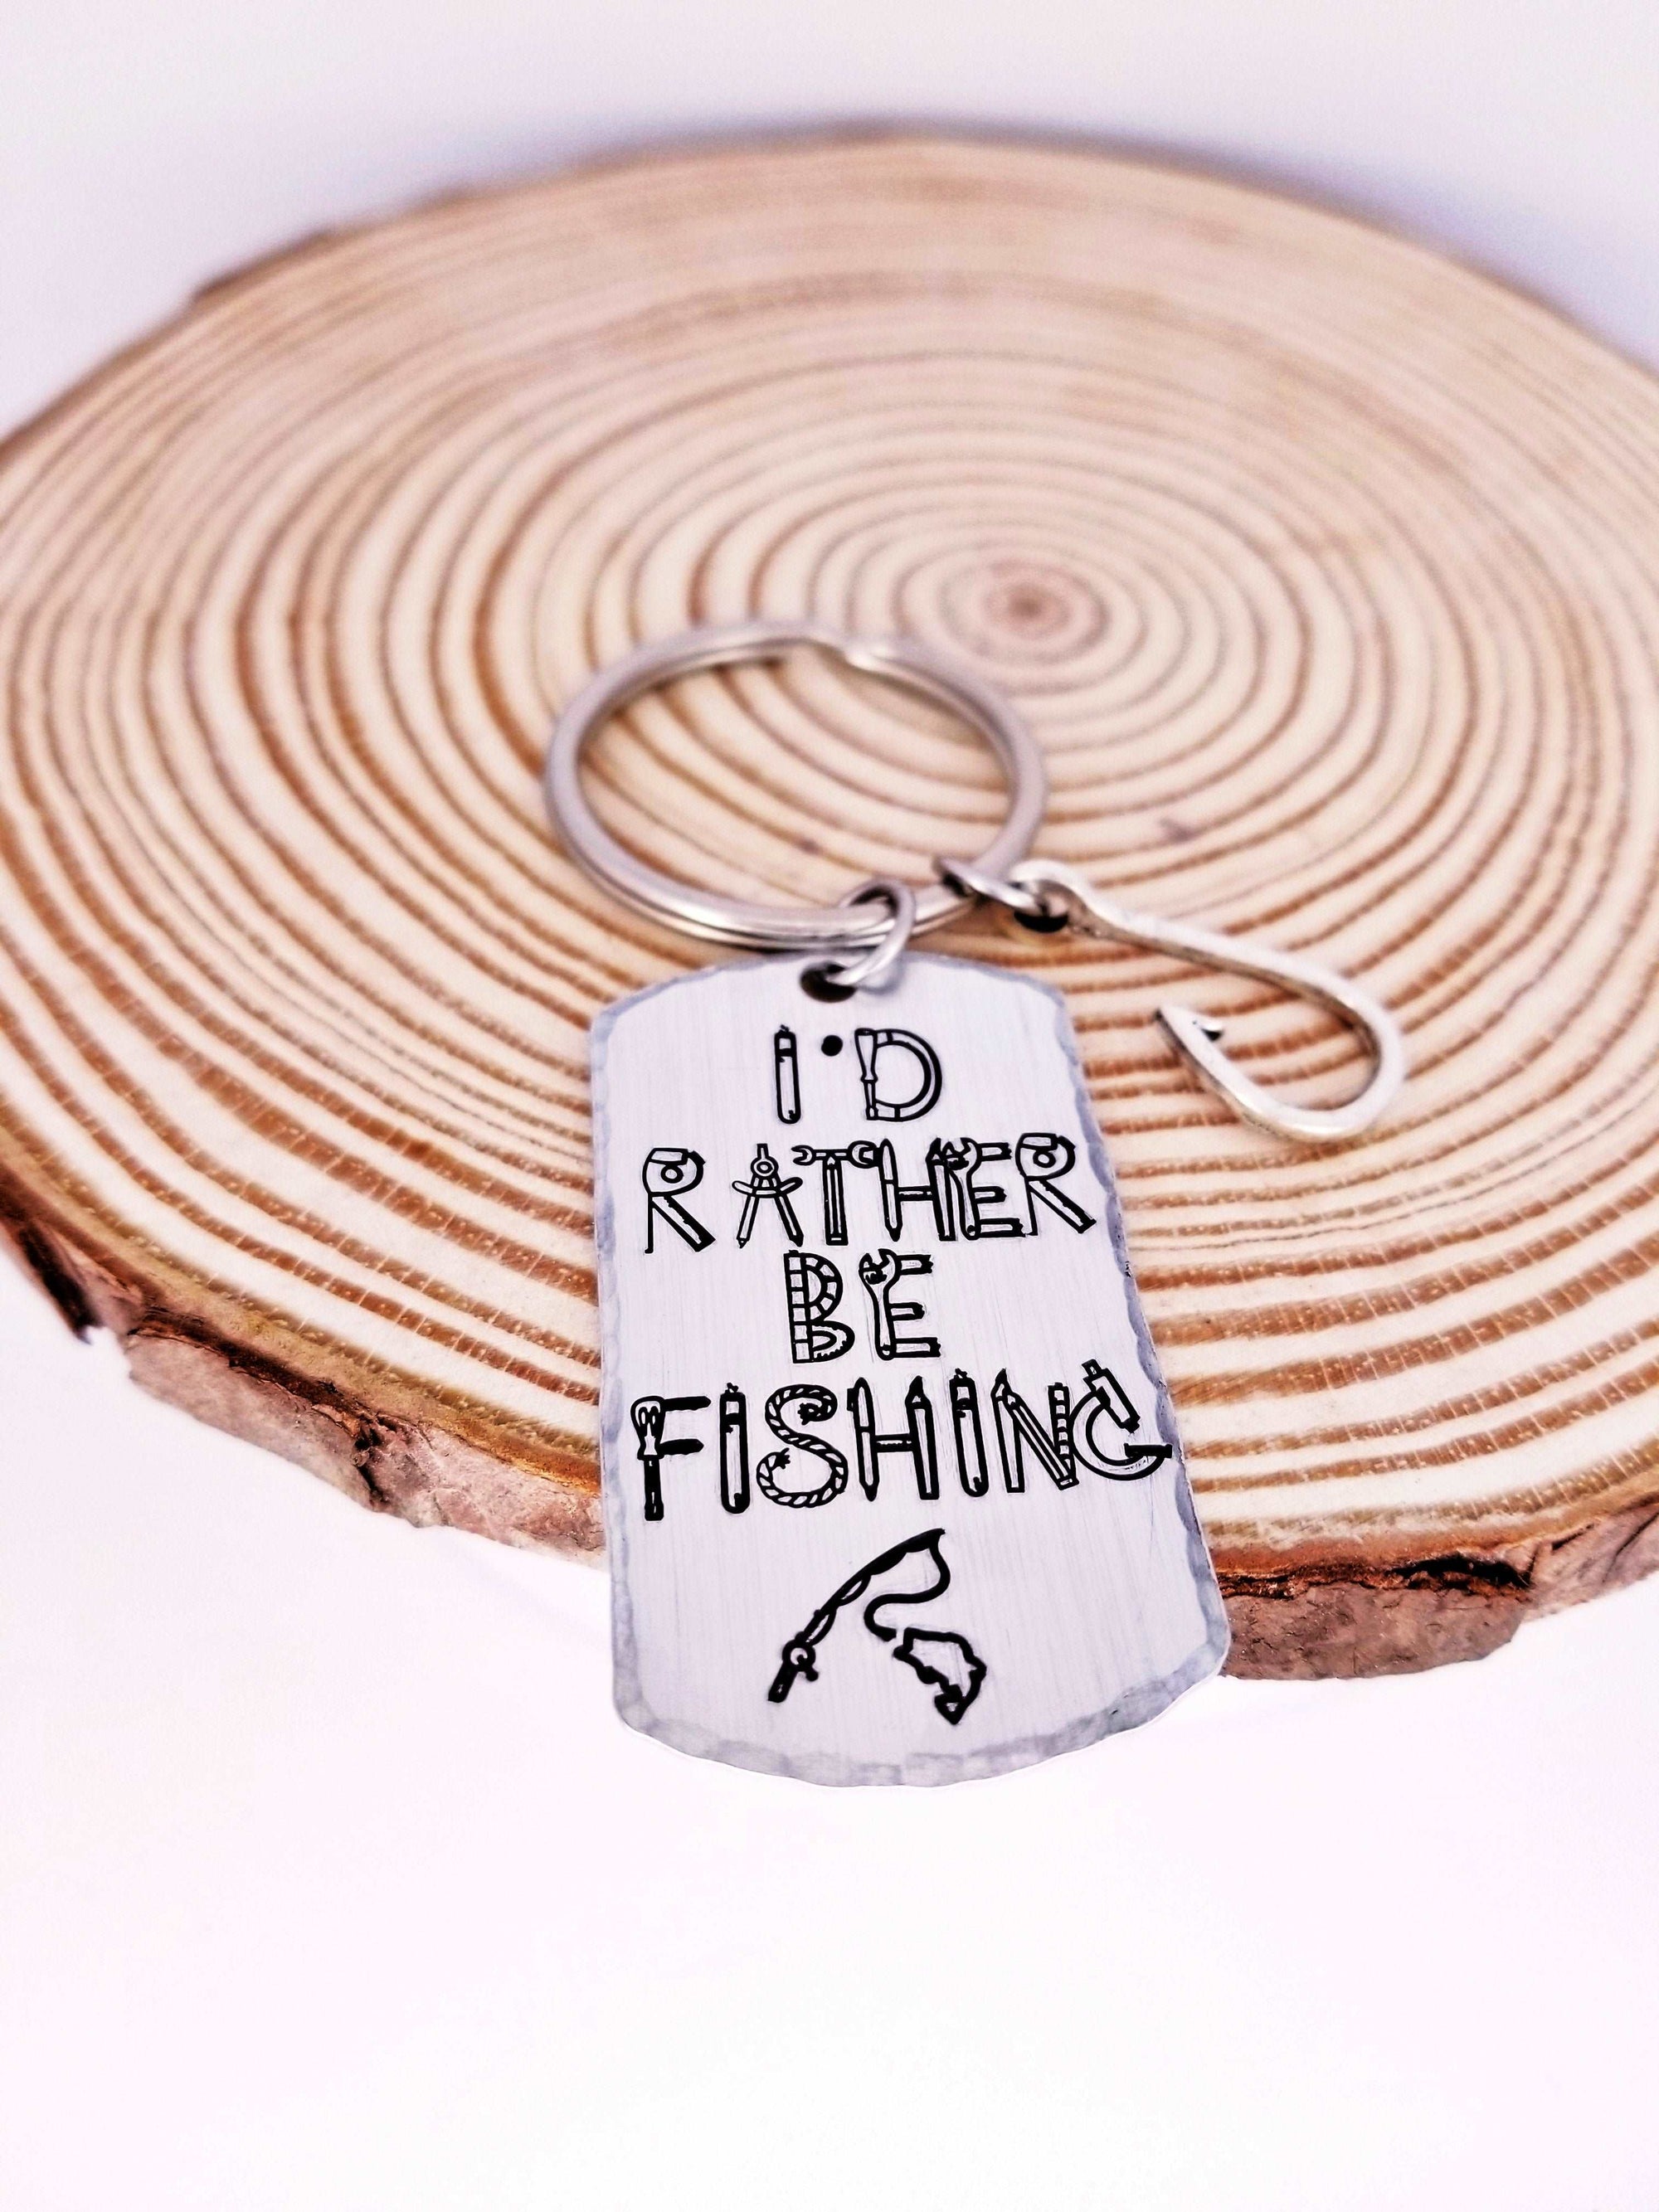 I'd Rather Be Fishing, Father's Day Gift, Fisherman Gift, Husband Gift, Boyfriend Gift, Keychain Gift, Handstamped Men's Gift